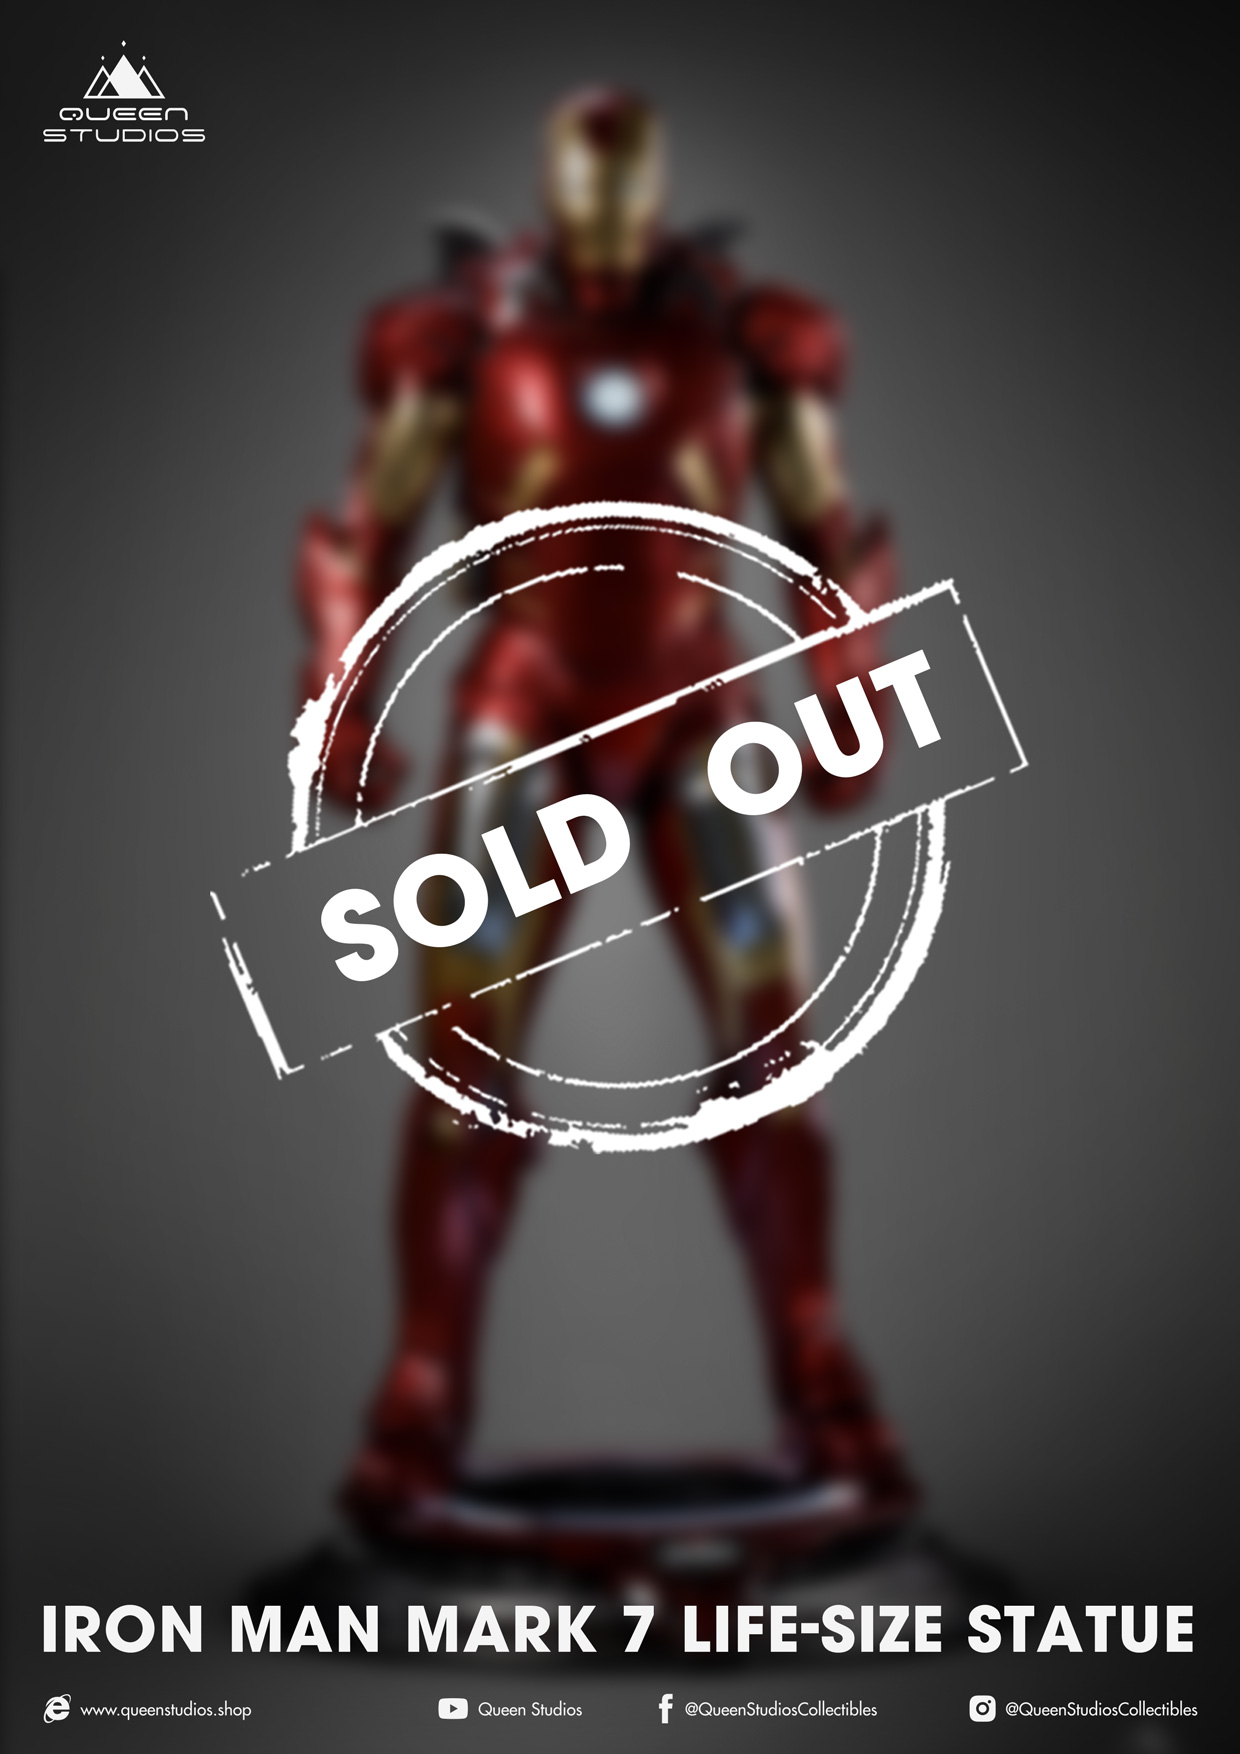 AVENGERS: ENDGAME - Iron Man MK 85 Life-size statue - SOLD OUT! – Section9